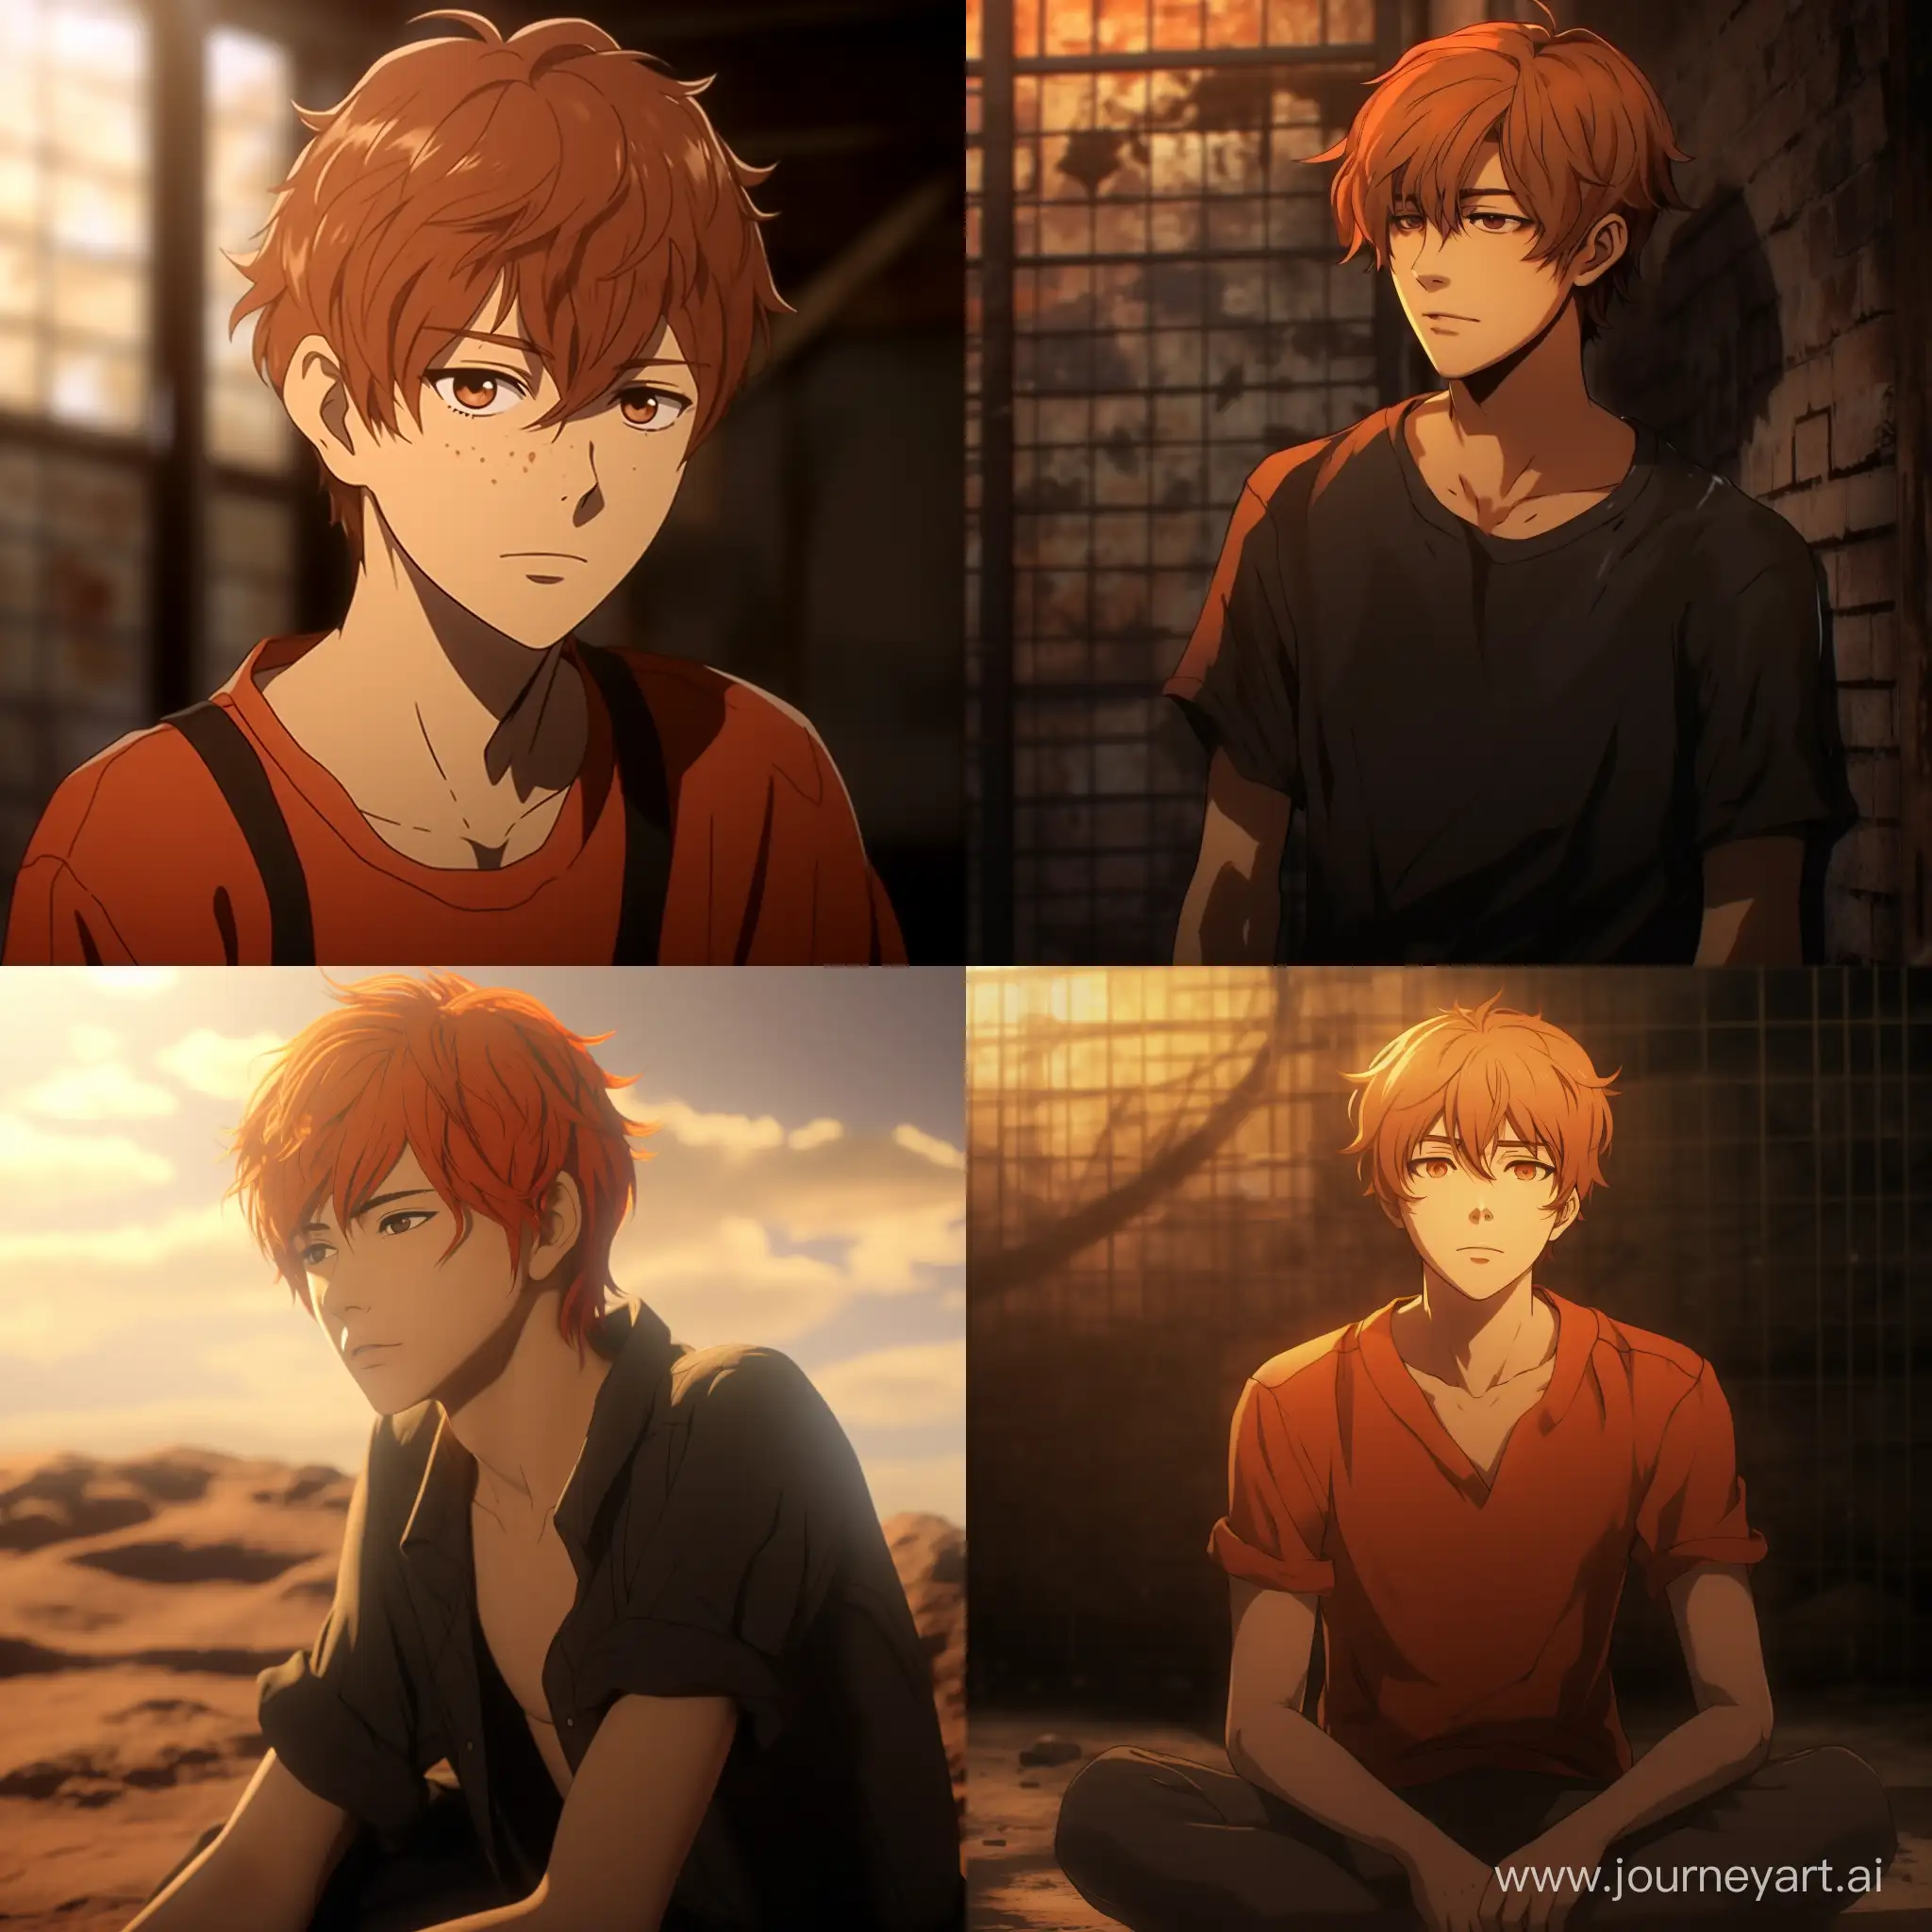 Vibrant-American-Teen-with-Orange-Hair-and-Attire-from-Bungo-Stray-Dogs-Series